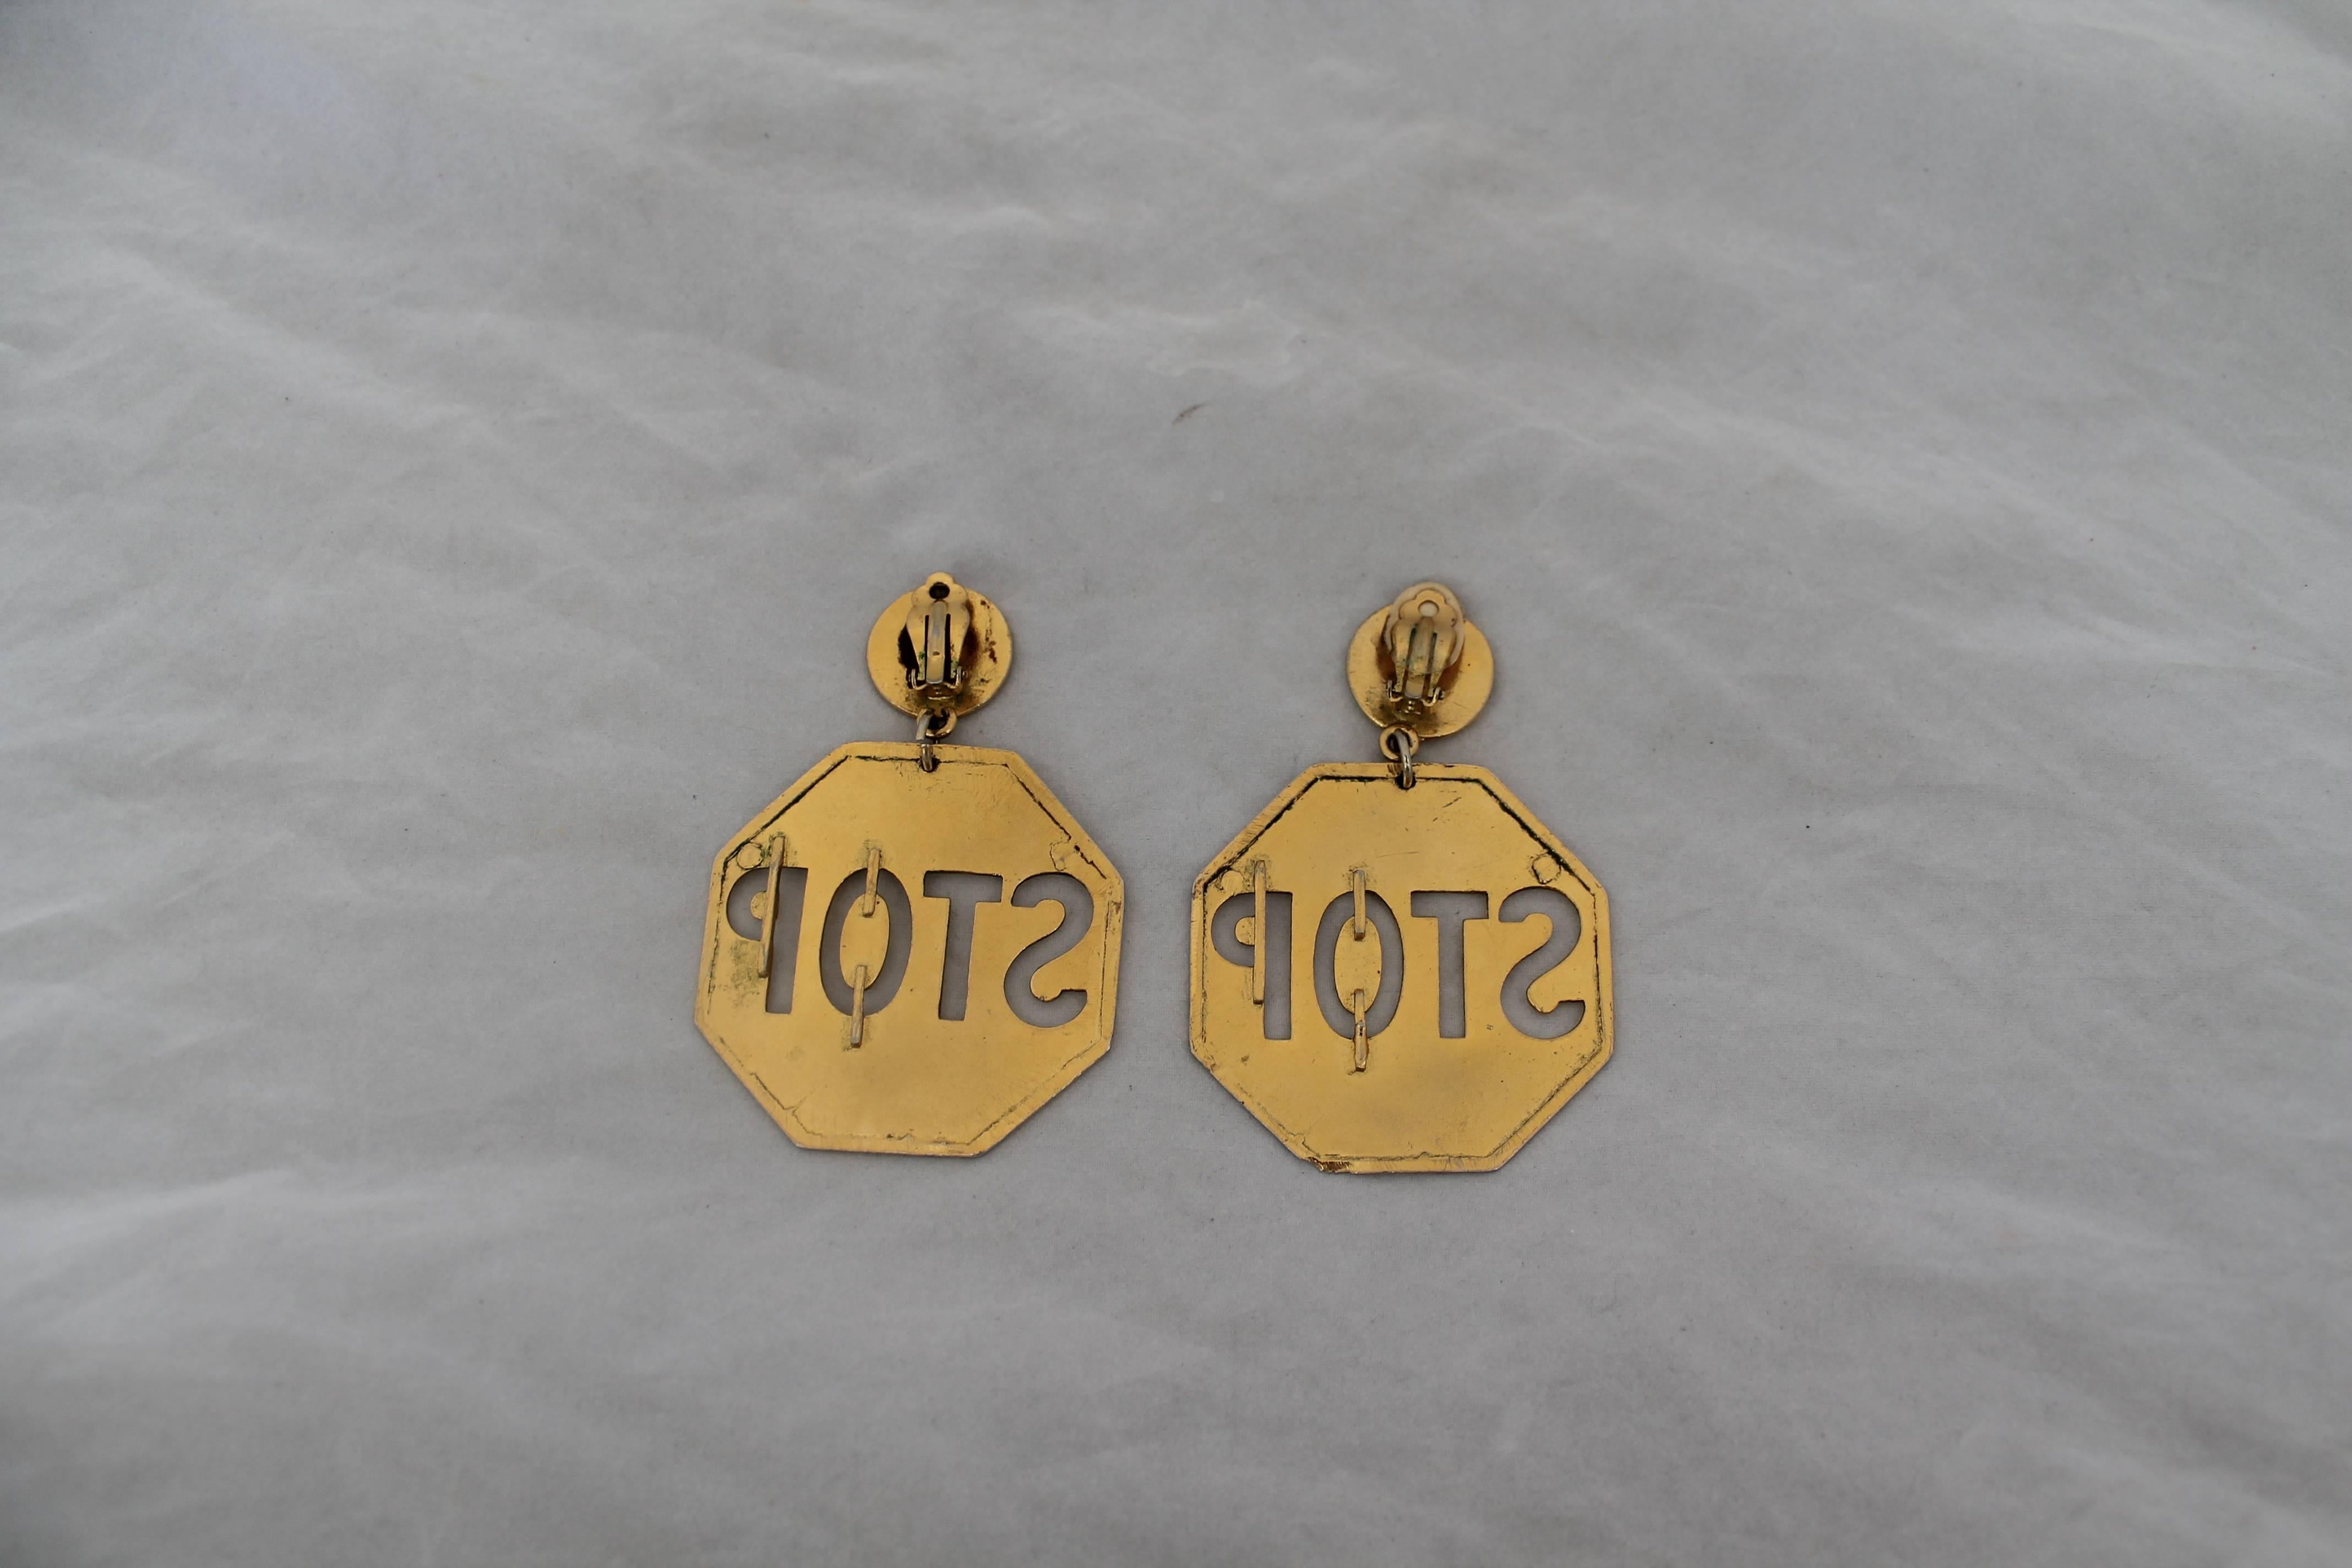 Moschino Vintage Goldtone Stop Sign Clip-on Earrings - circa 1980's. These earrings are in good vintage condition with wear on its color consistent with its age. The backs of one of these earrings has a brown coating on it. 

Length- 3.65